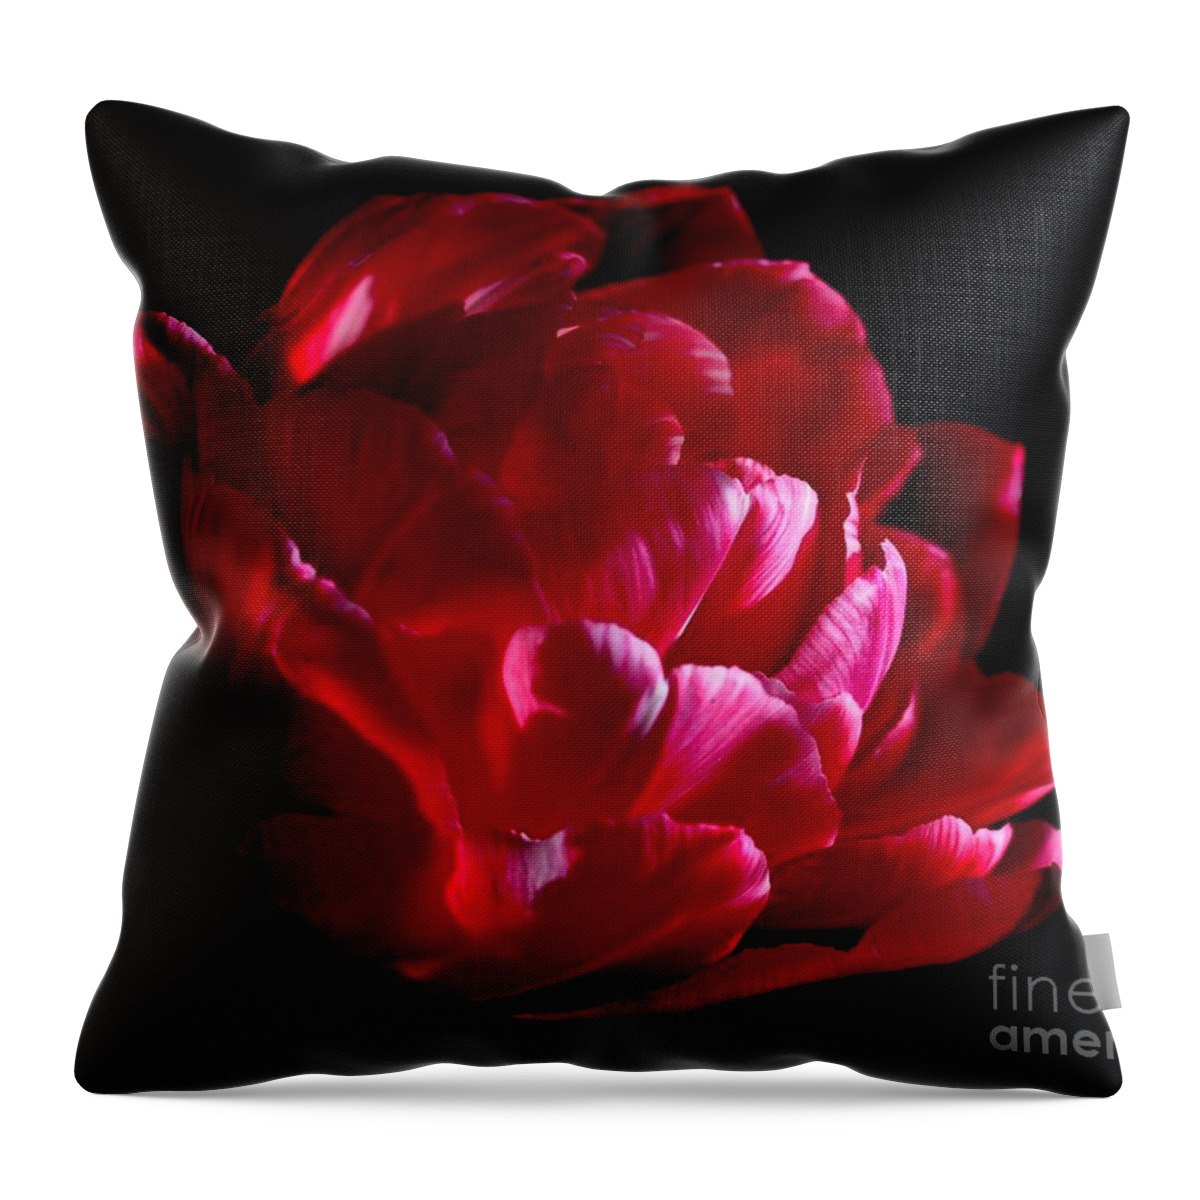 Tulipe Throw Pillow featuring the photograph Tulipe #5 by Sylvie Leandre